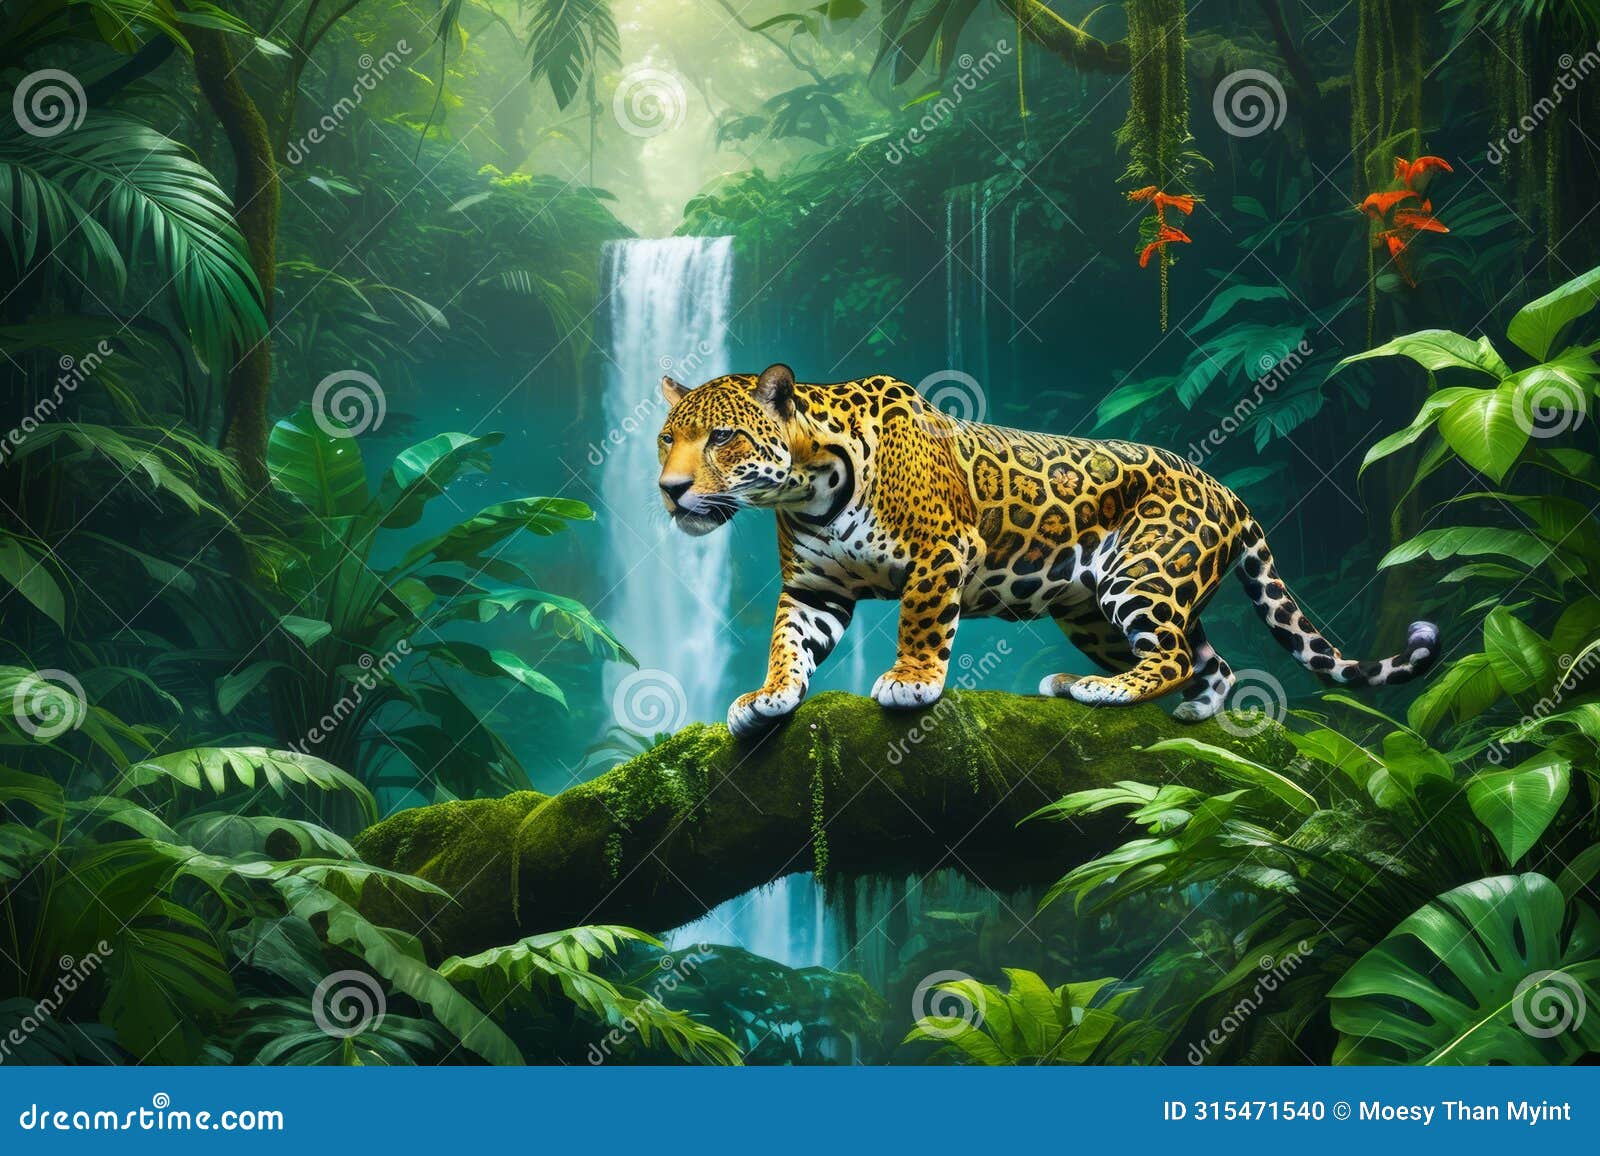 the elusive jaguar in radiant rainforest, surrounded by green lush, verdant, and tranquil ecosystem